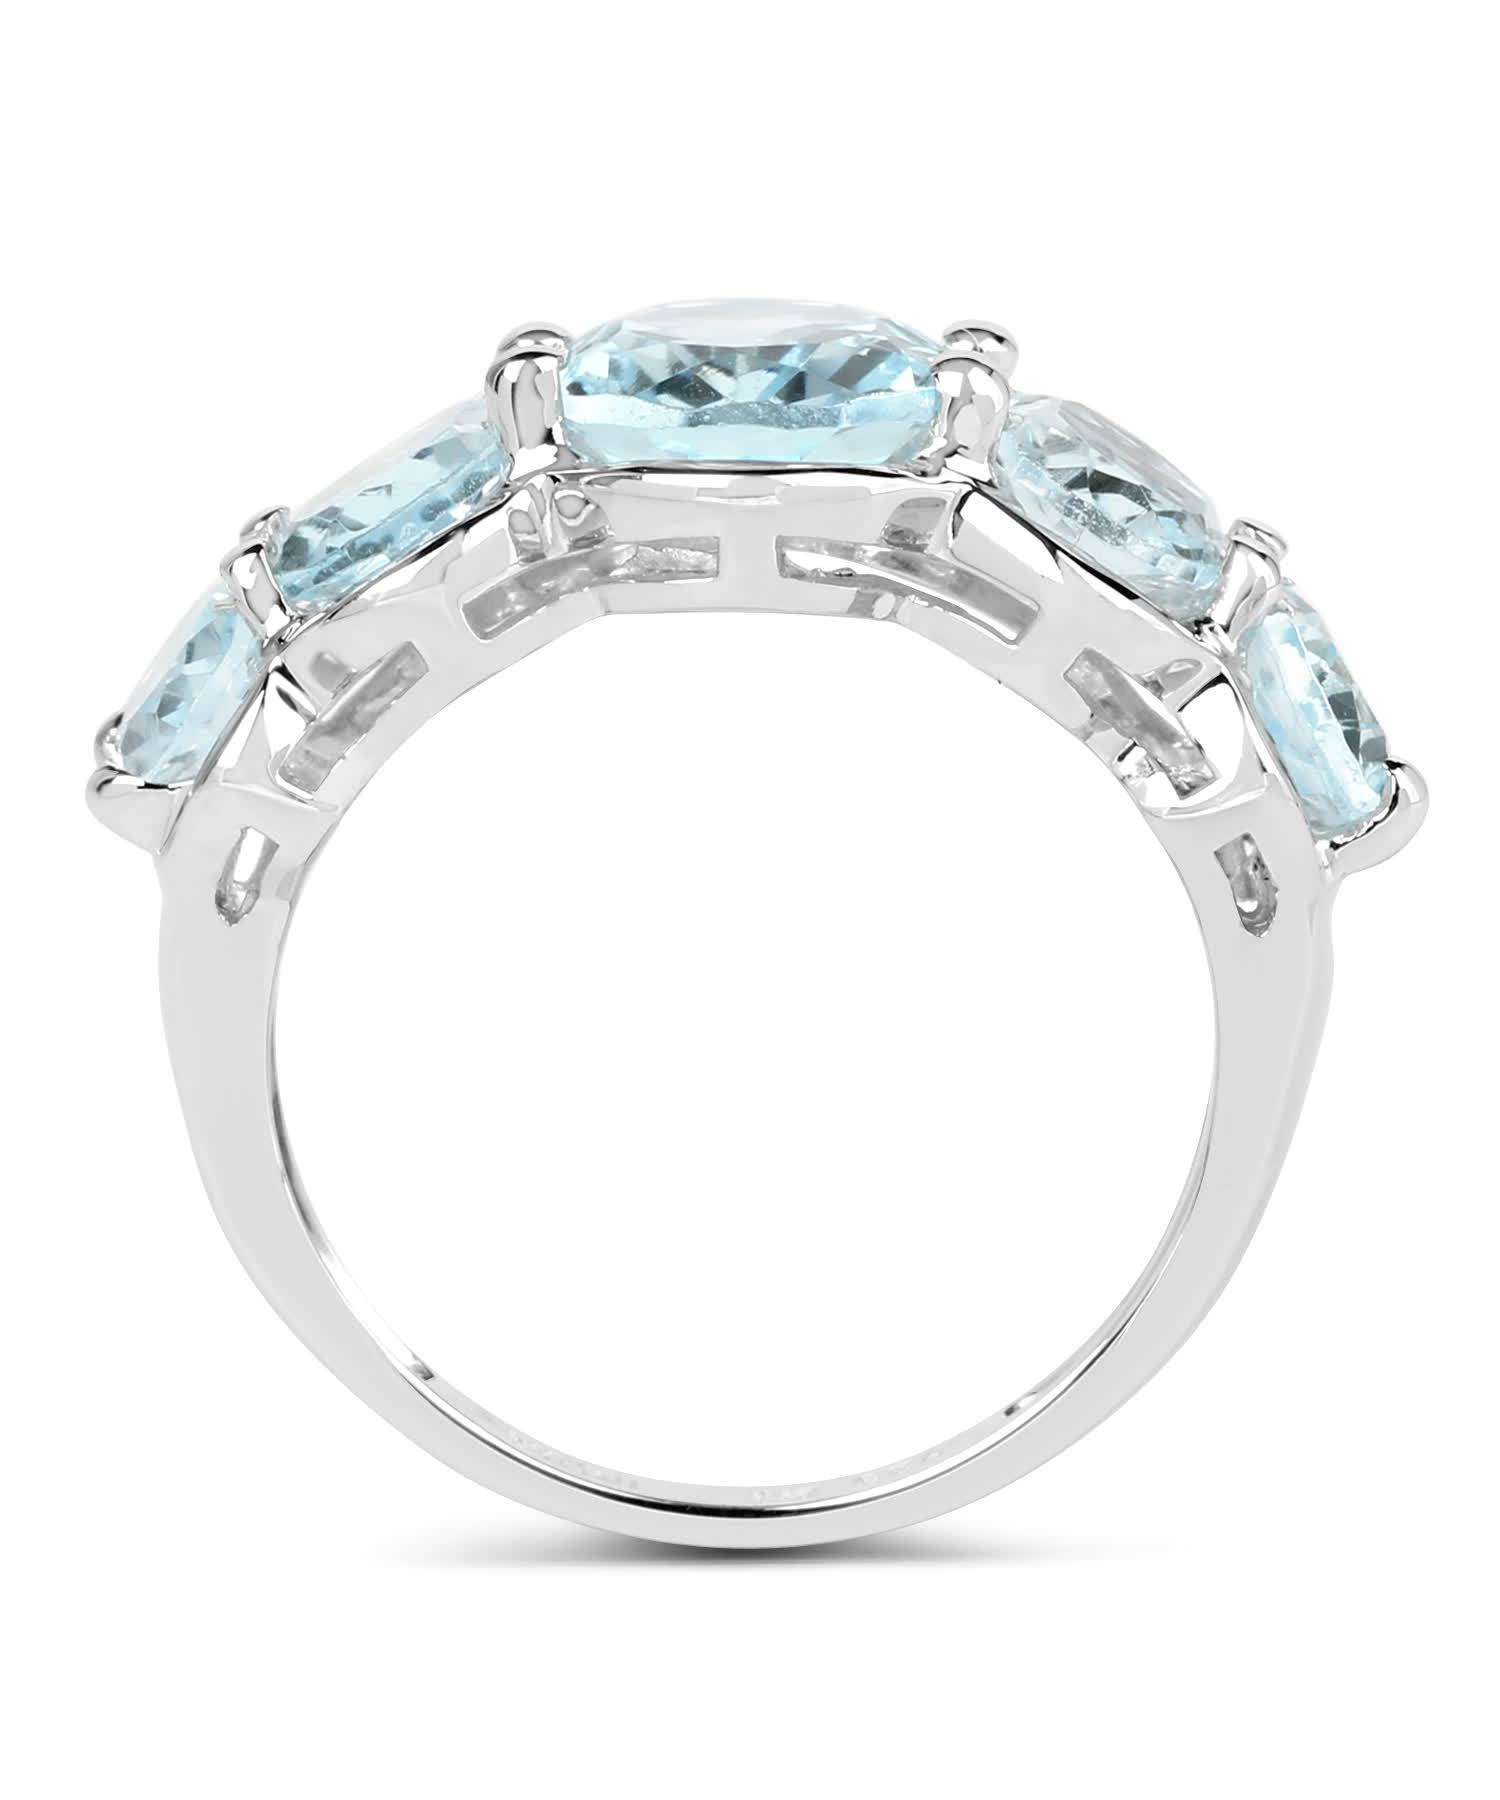 5.42ctw Natural Sky Blue Topaz Rhodium Plated 925 Sterling Silver Right Hand Ring View 2